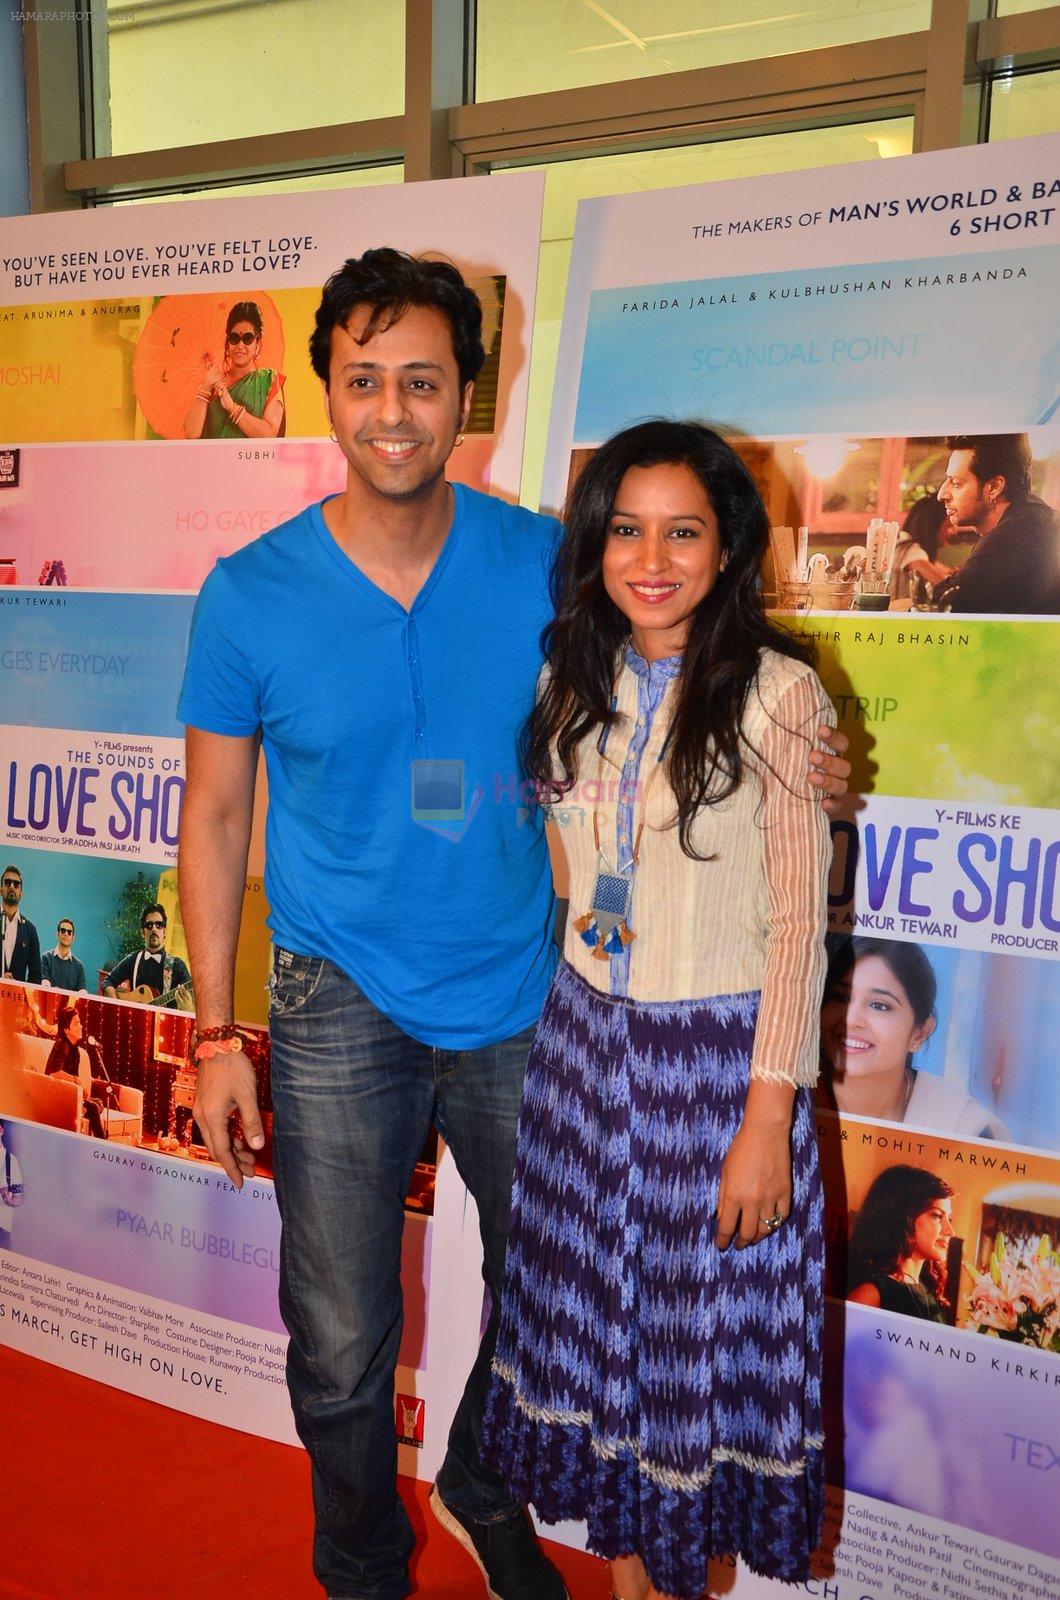 Salim Merchant at the launch of Love Shots film launch on 7th March 2016